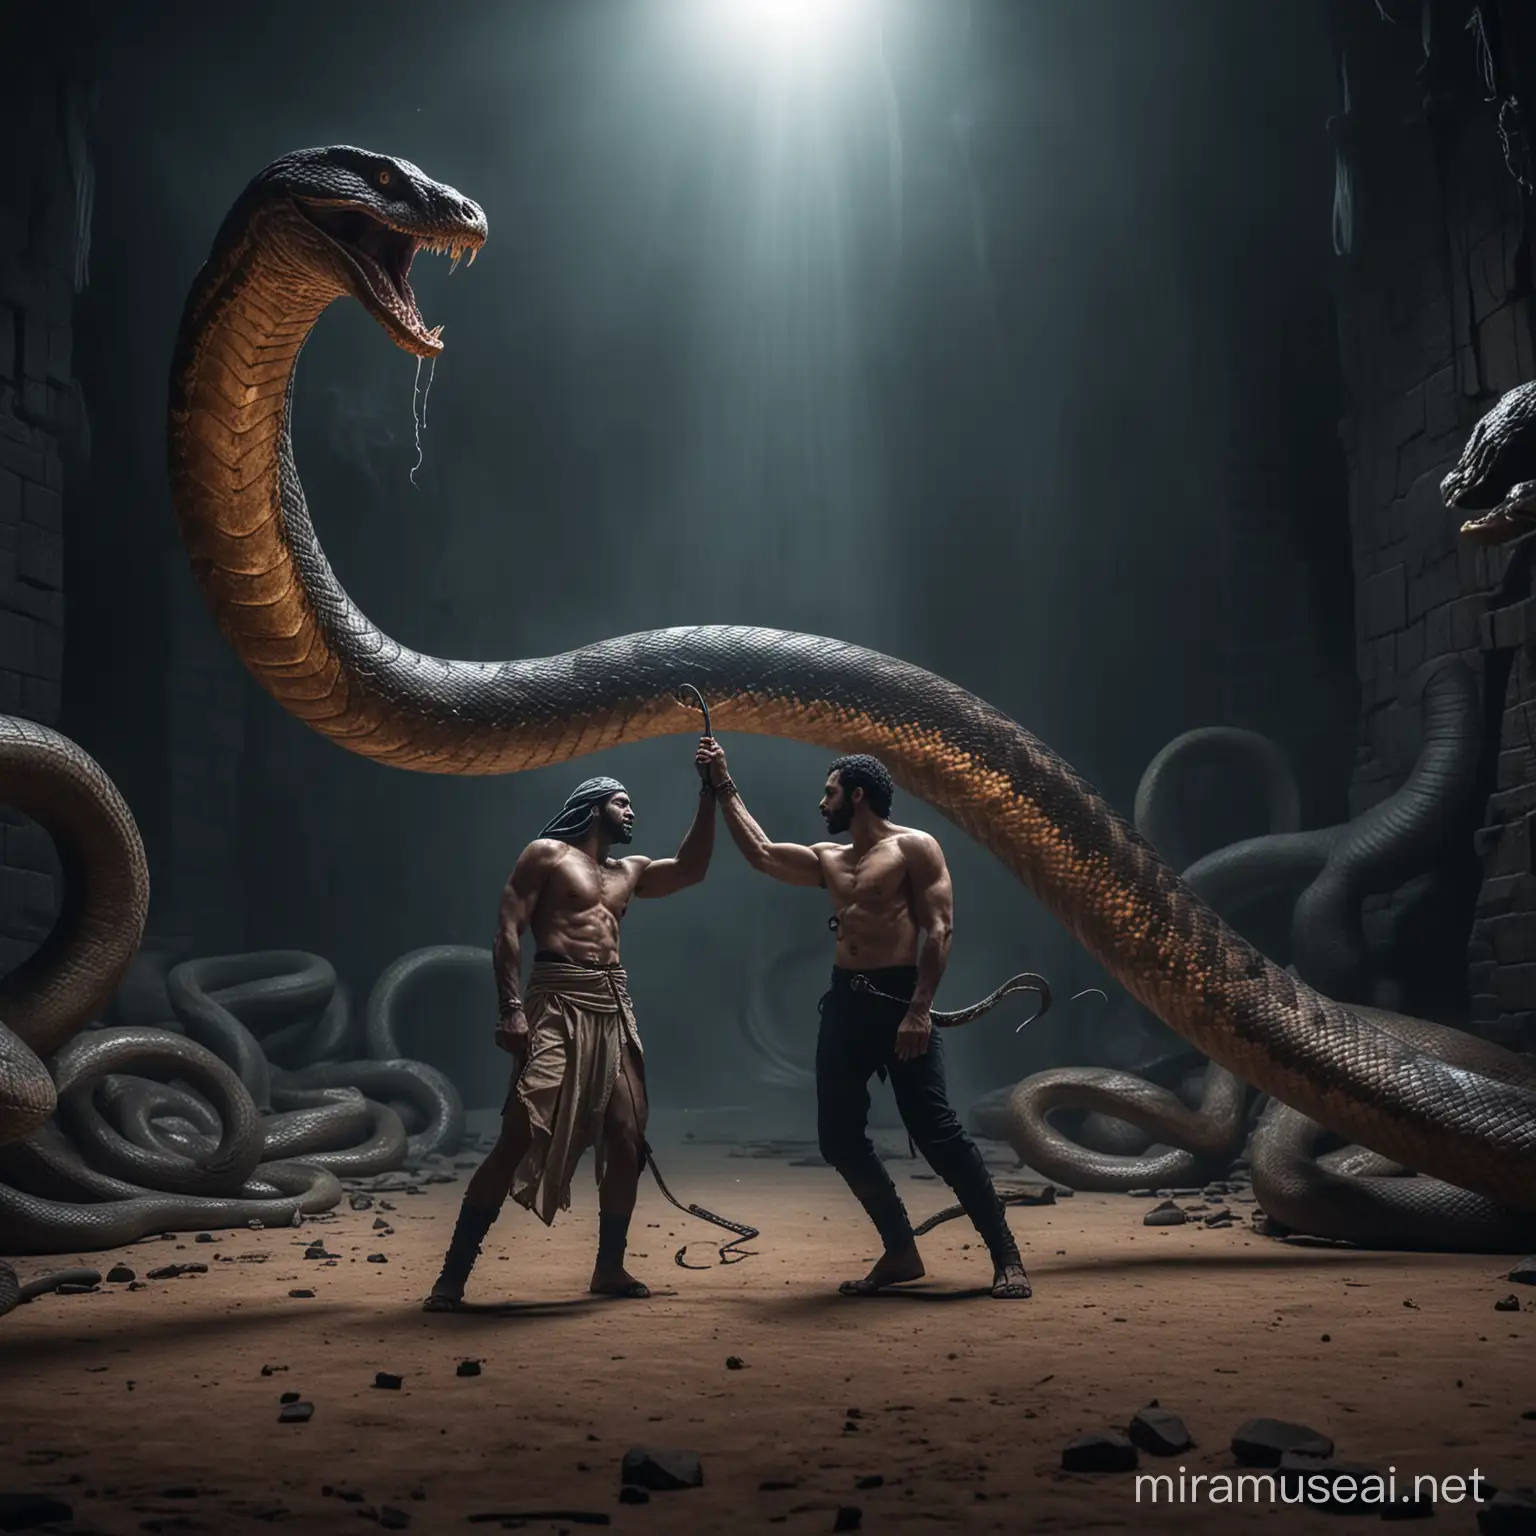 egiptian man fights against a giant snake in the underworld at nigh, full body